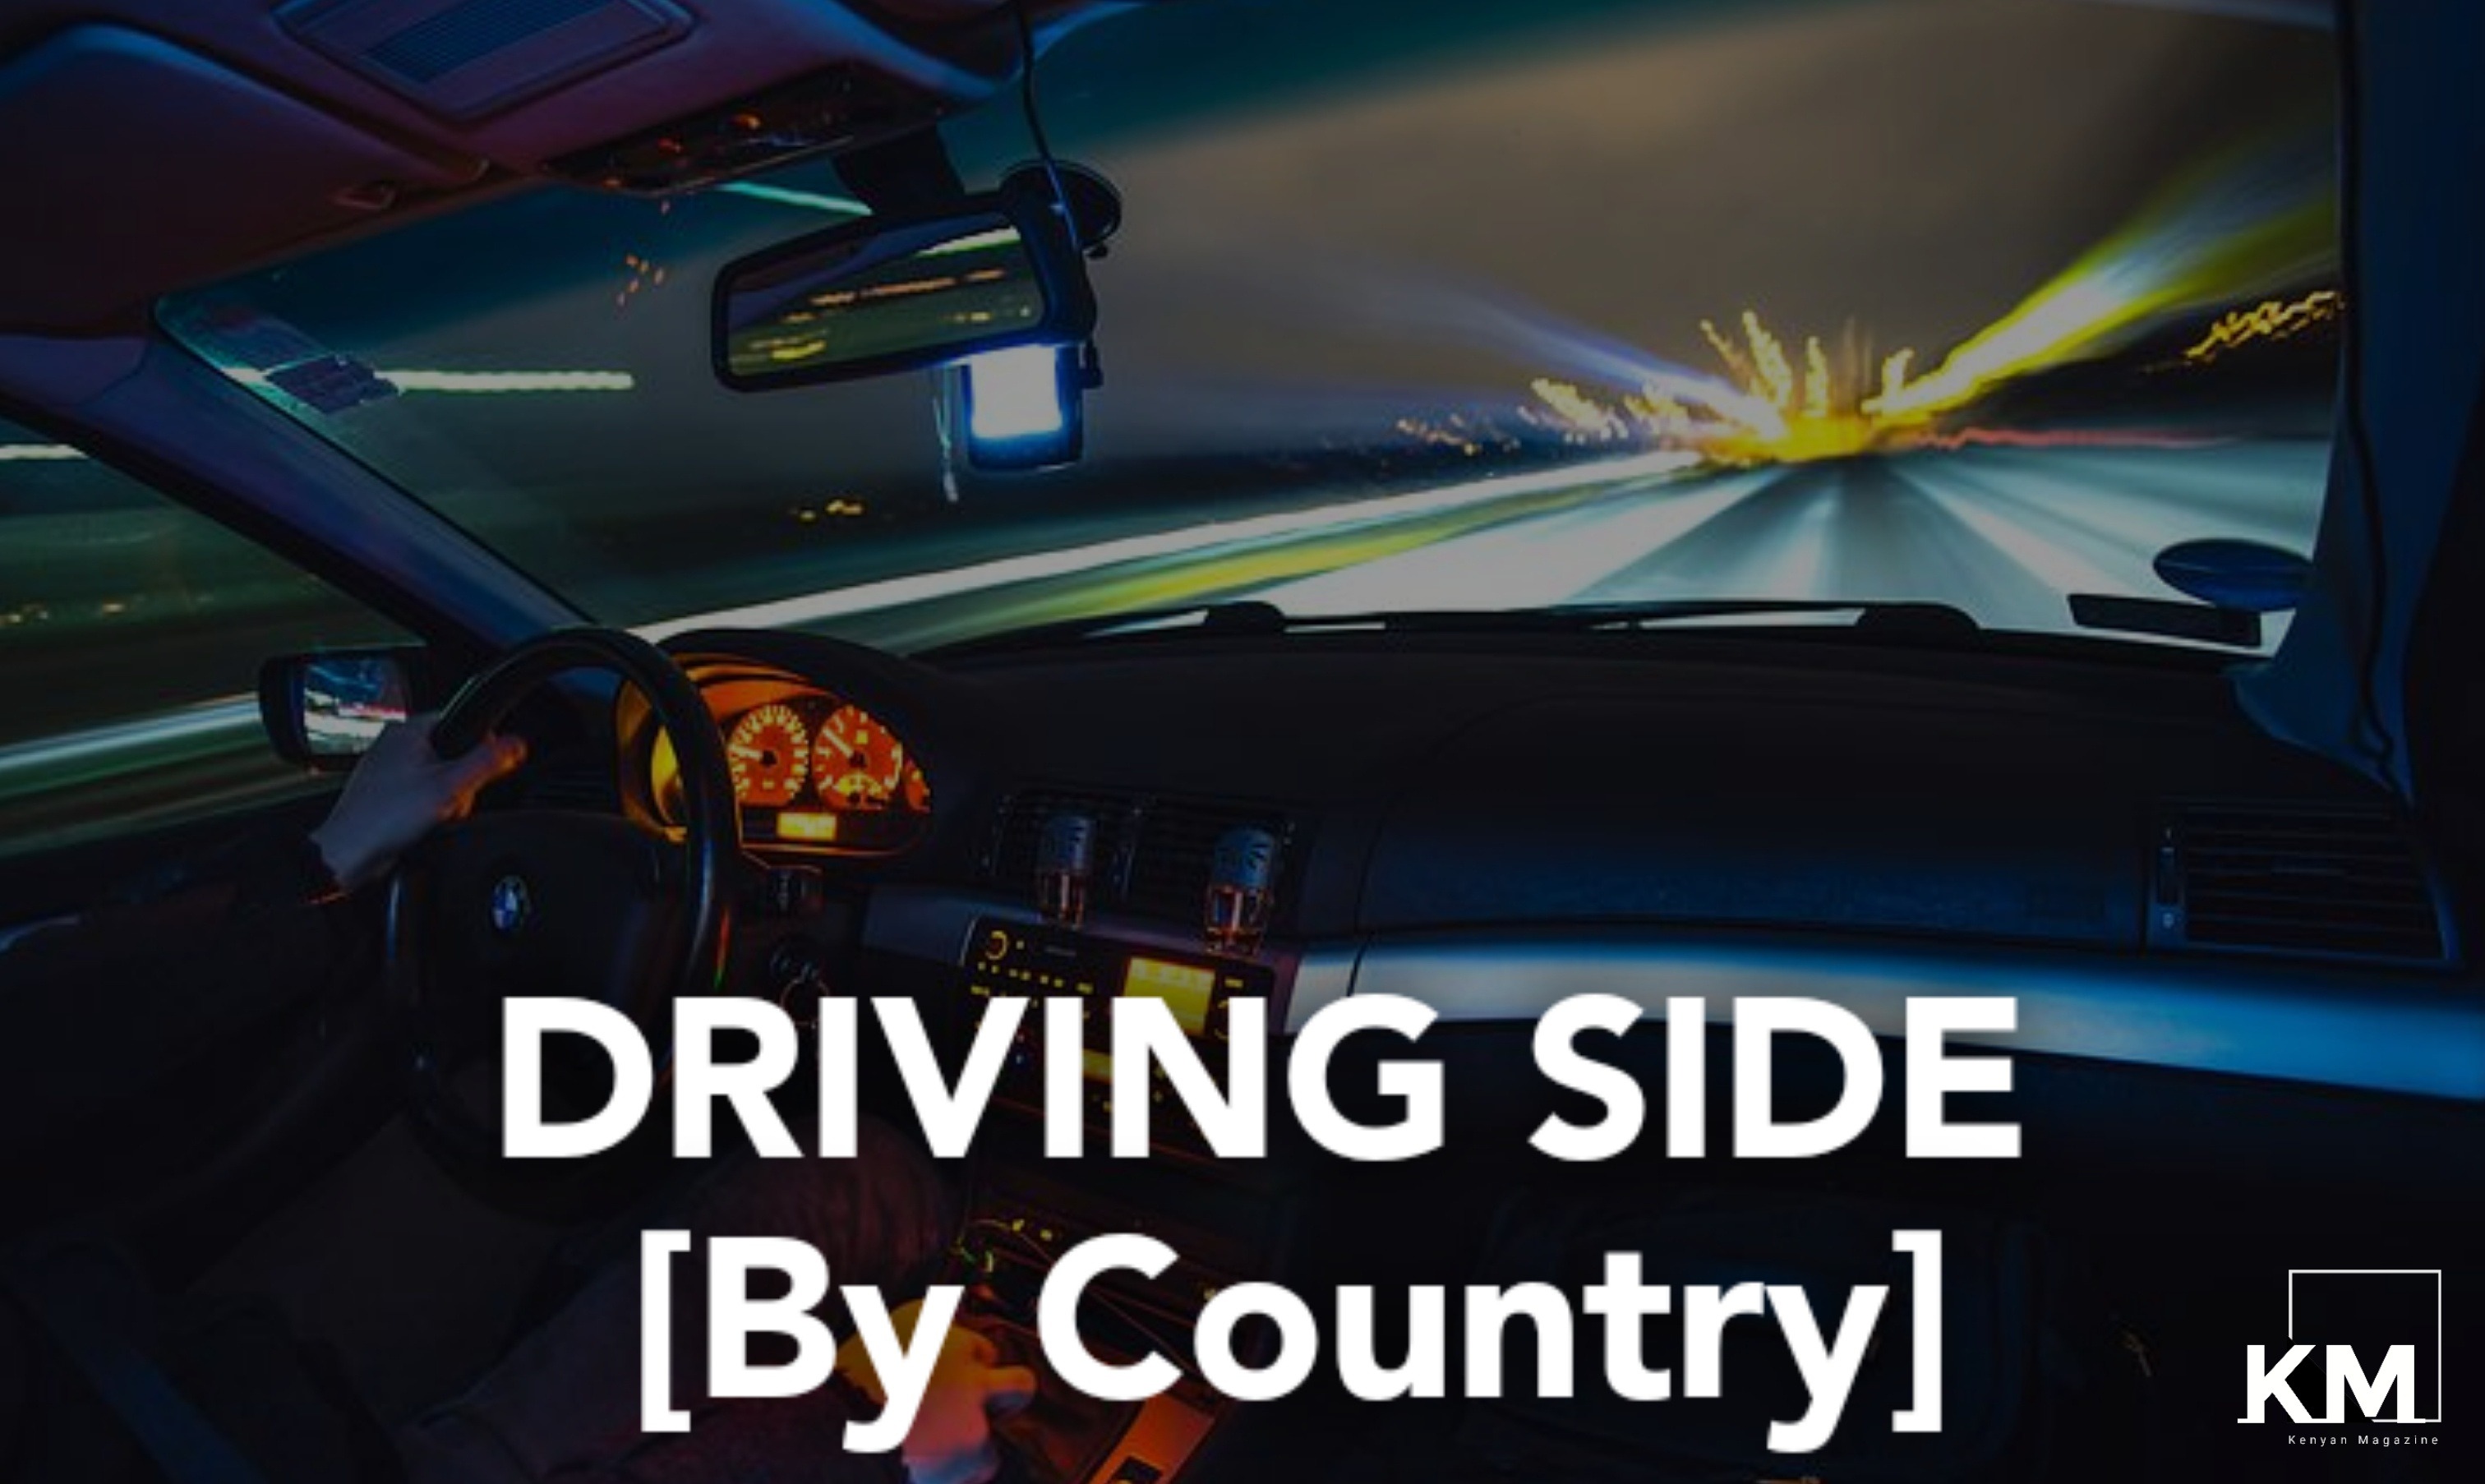 Driving Side by country